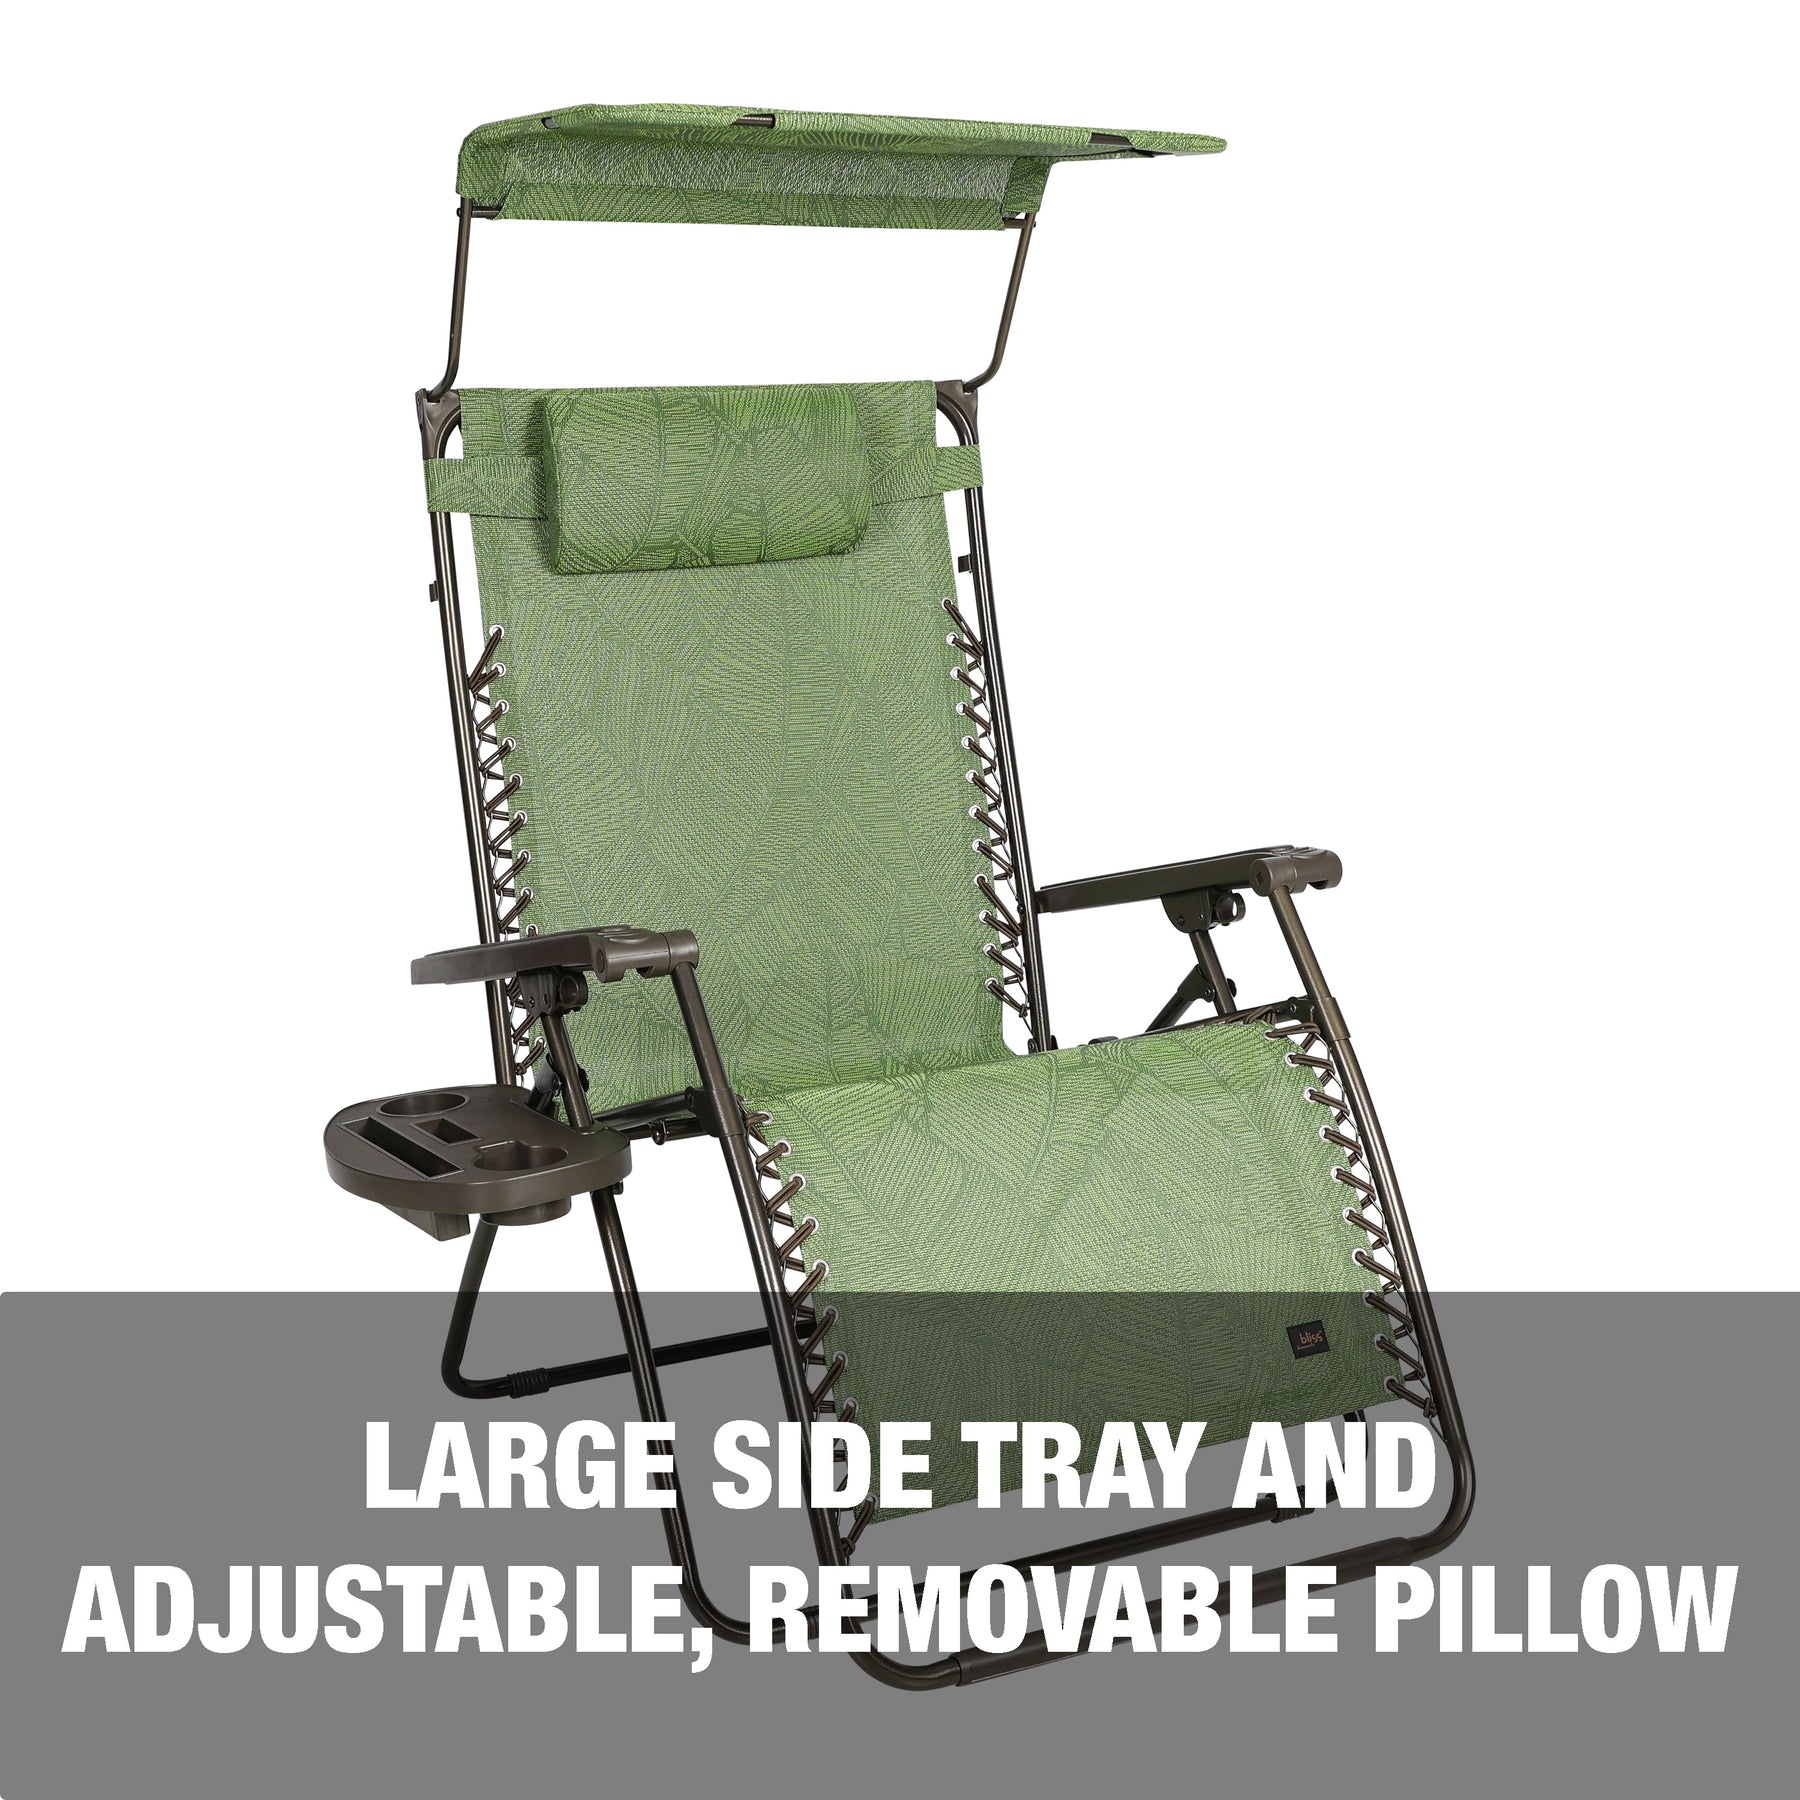 Large side tray and adjustable, removeable pillow.